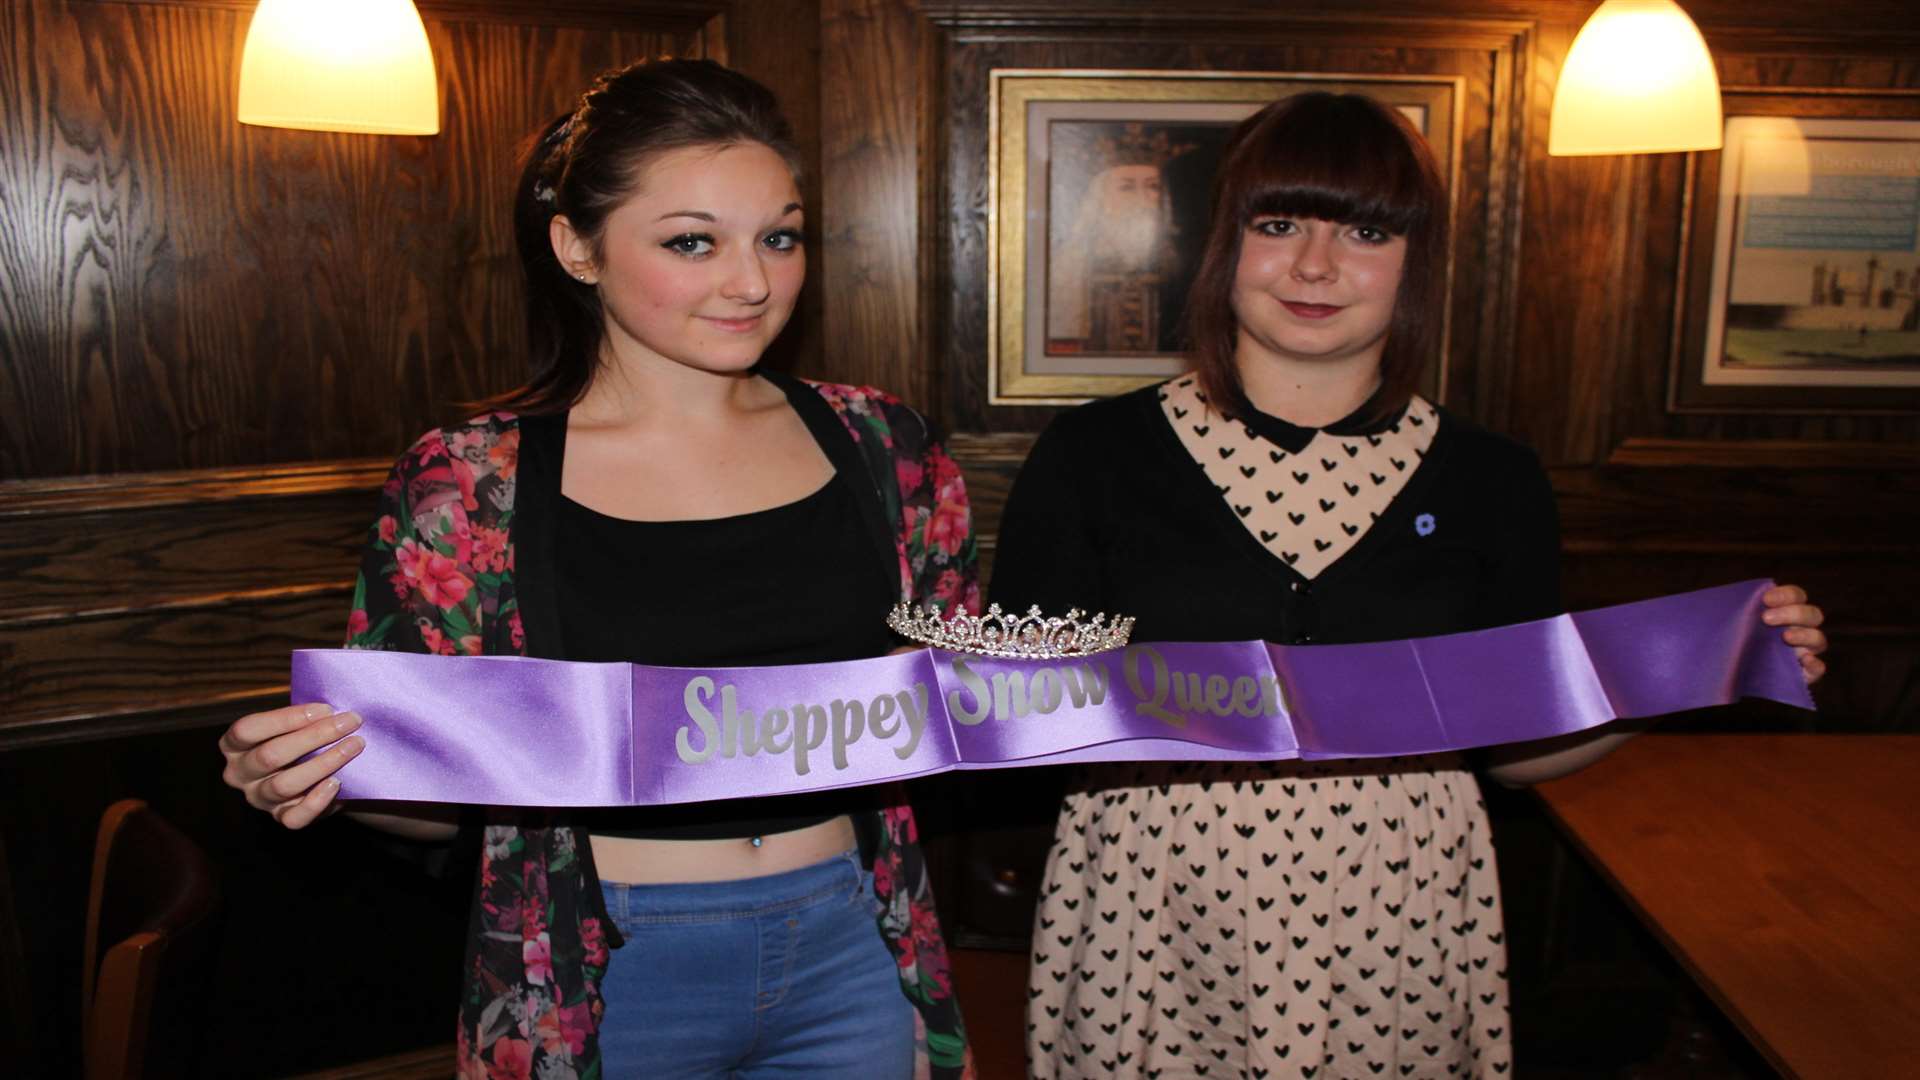 Hannah Thompson and Katie-Ann Goodsell who were judged joint-winners of the Sheppey Snow Queen contest